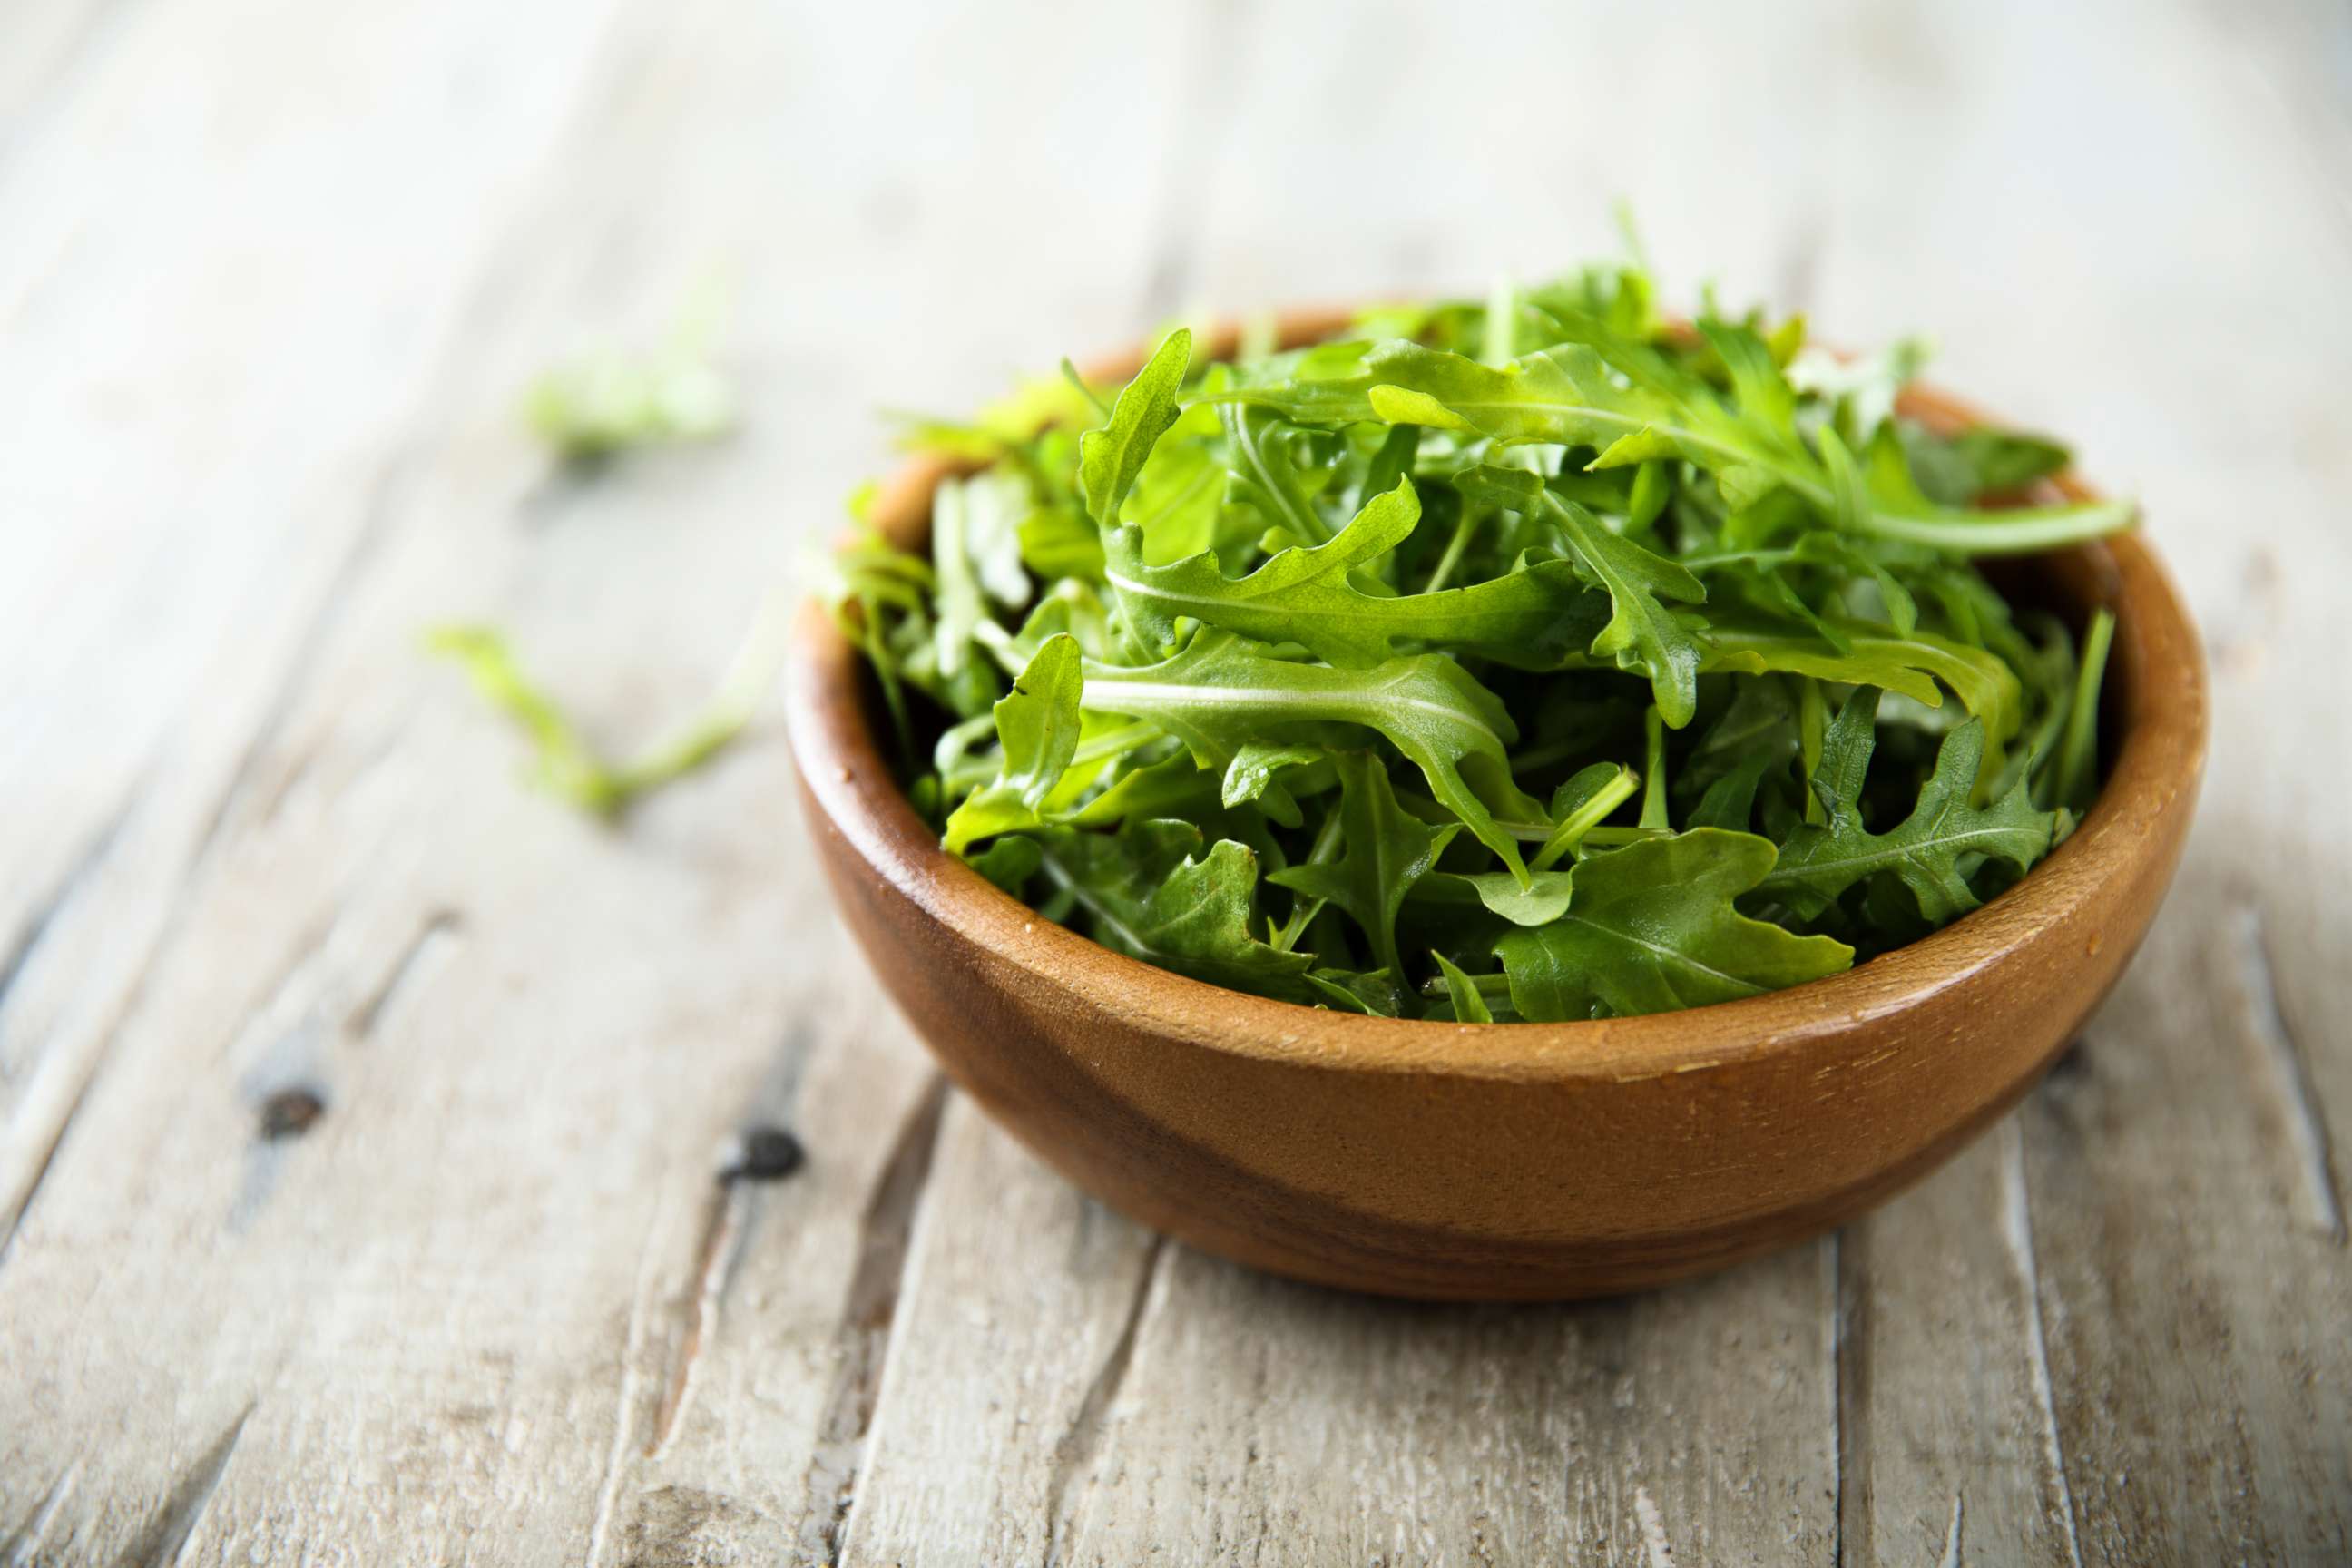 PHOTO: Fresh arugula in a wooden bowl is seen in this stock photo.